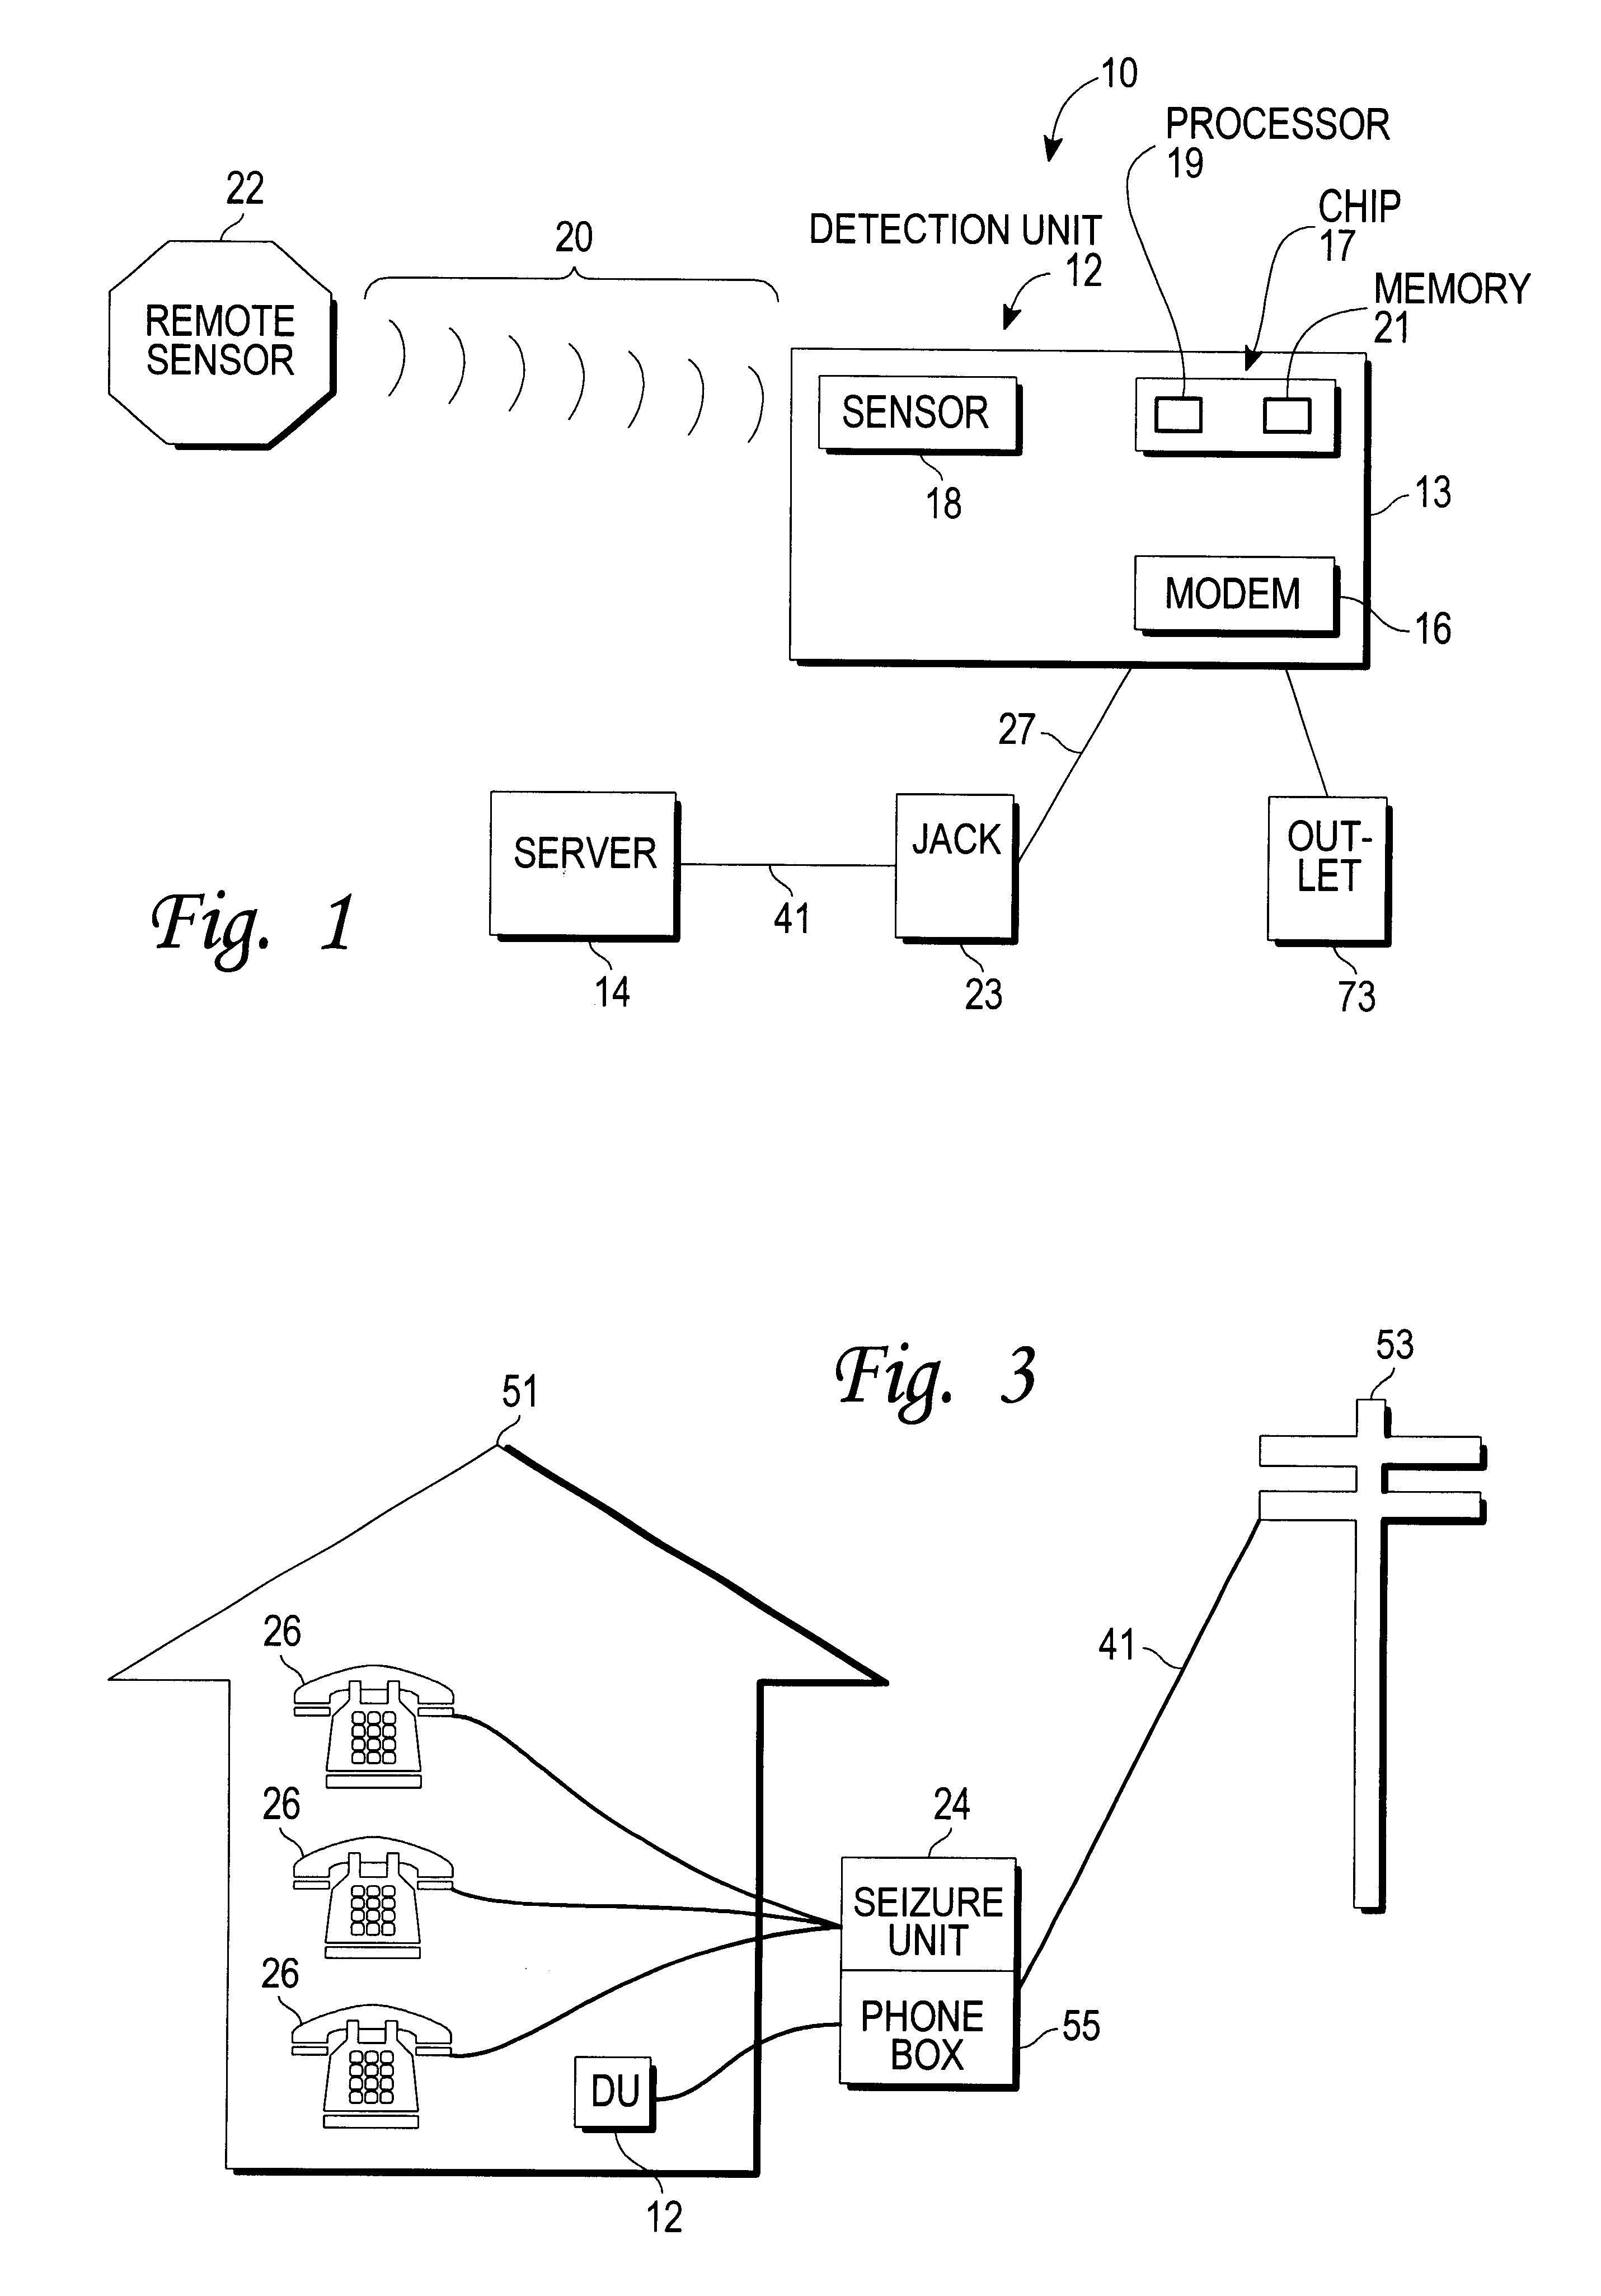 Condition detection and notification systems and methods